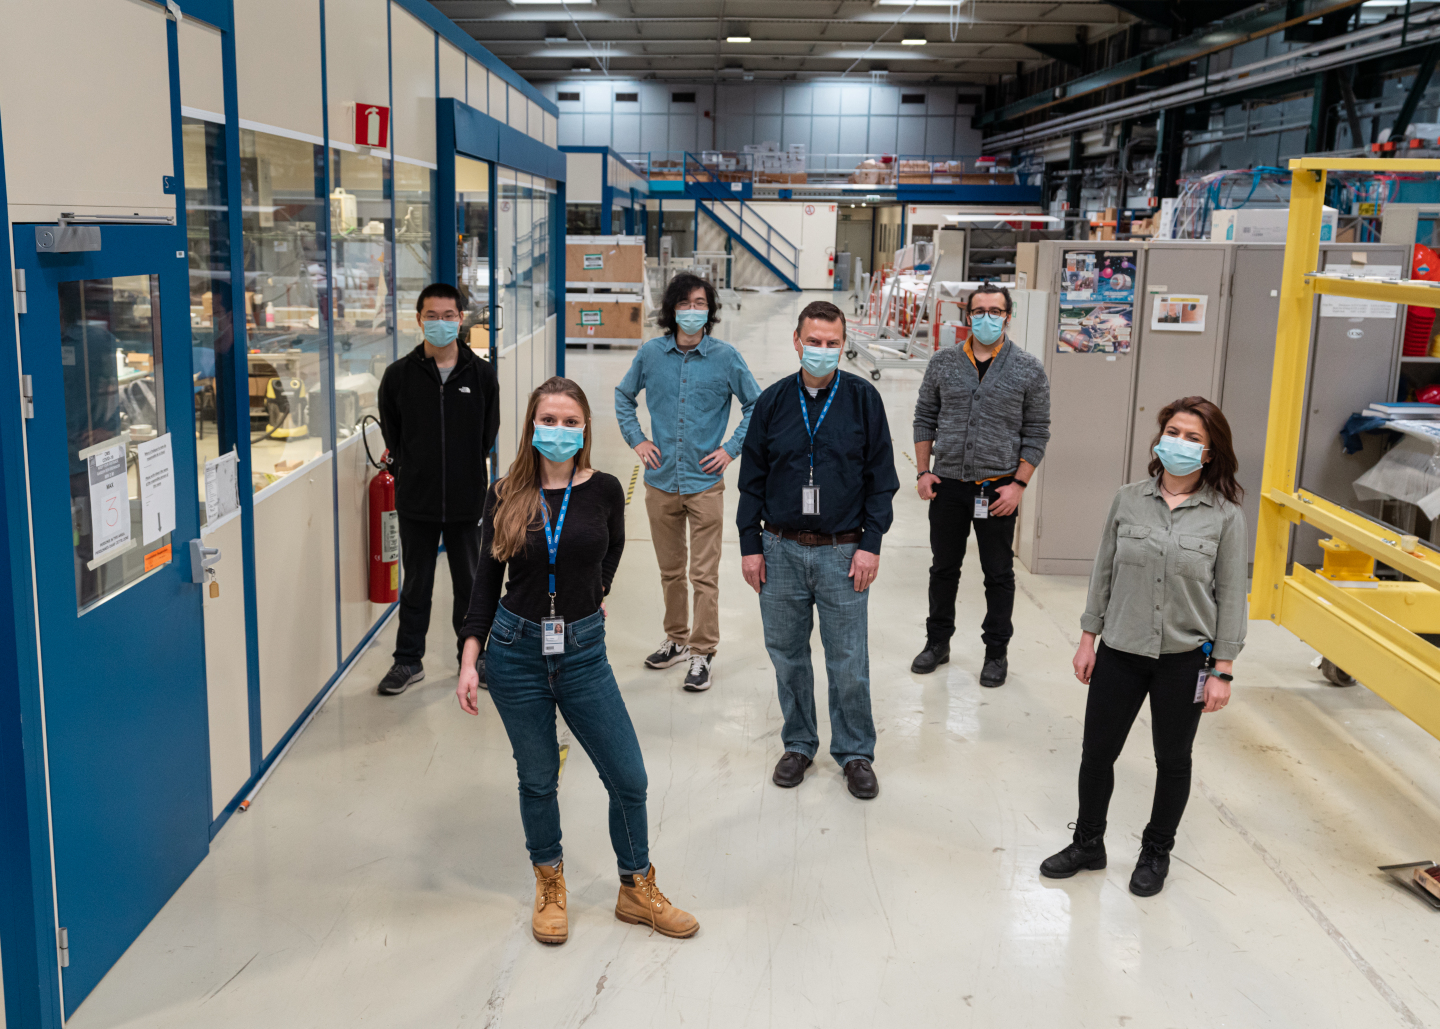 Our rework team group photo, taken outside of the CMS HCAL Clean Room in CERN Building 904. Back Row, Left to Right: Long Wang, Sebastian (Xuli) Yan, and Furkan Dolek. Middle: Jay Dittmann. Front, Left to Right: Grace Cummings, and Fatma Boran. Not pictured, Markus Seidel and Irina Tlisova. Credit: S.J. Hertzog, CERN